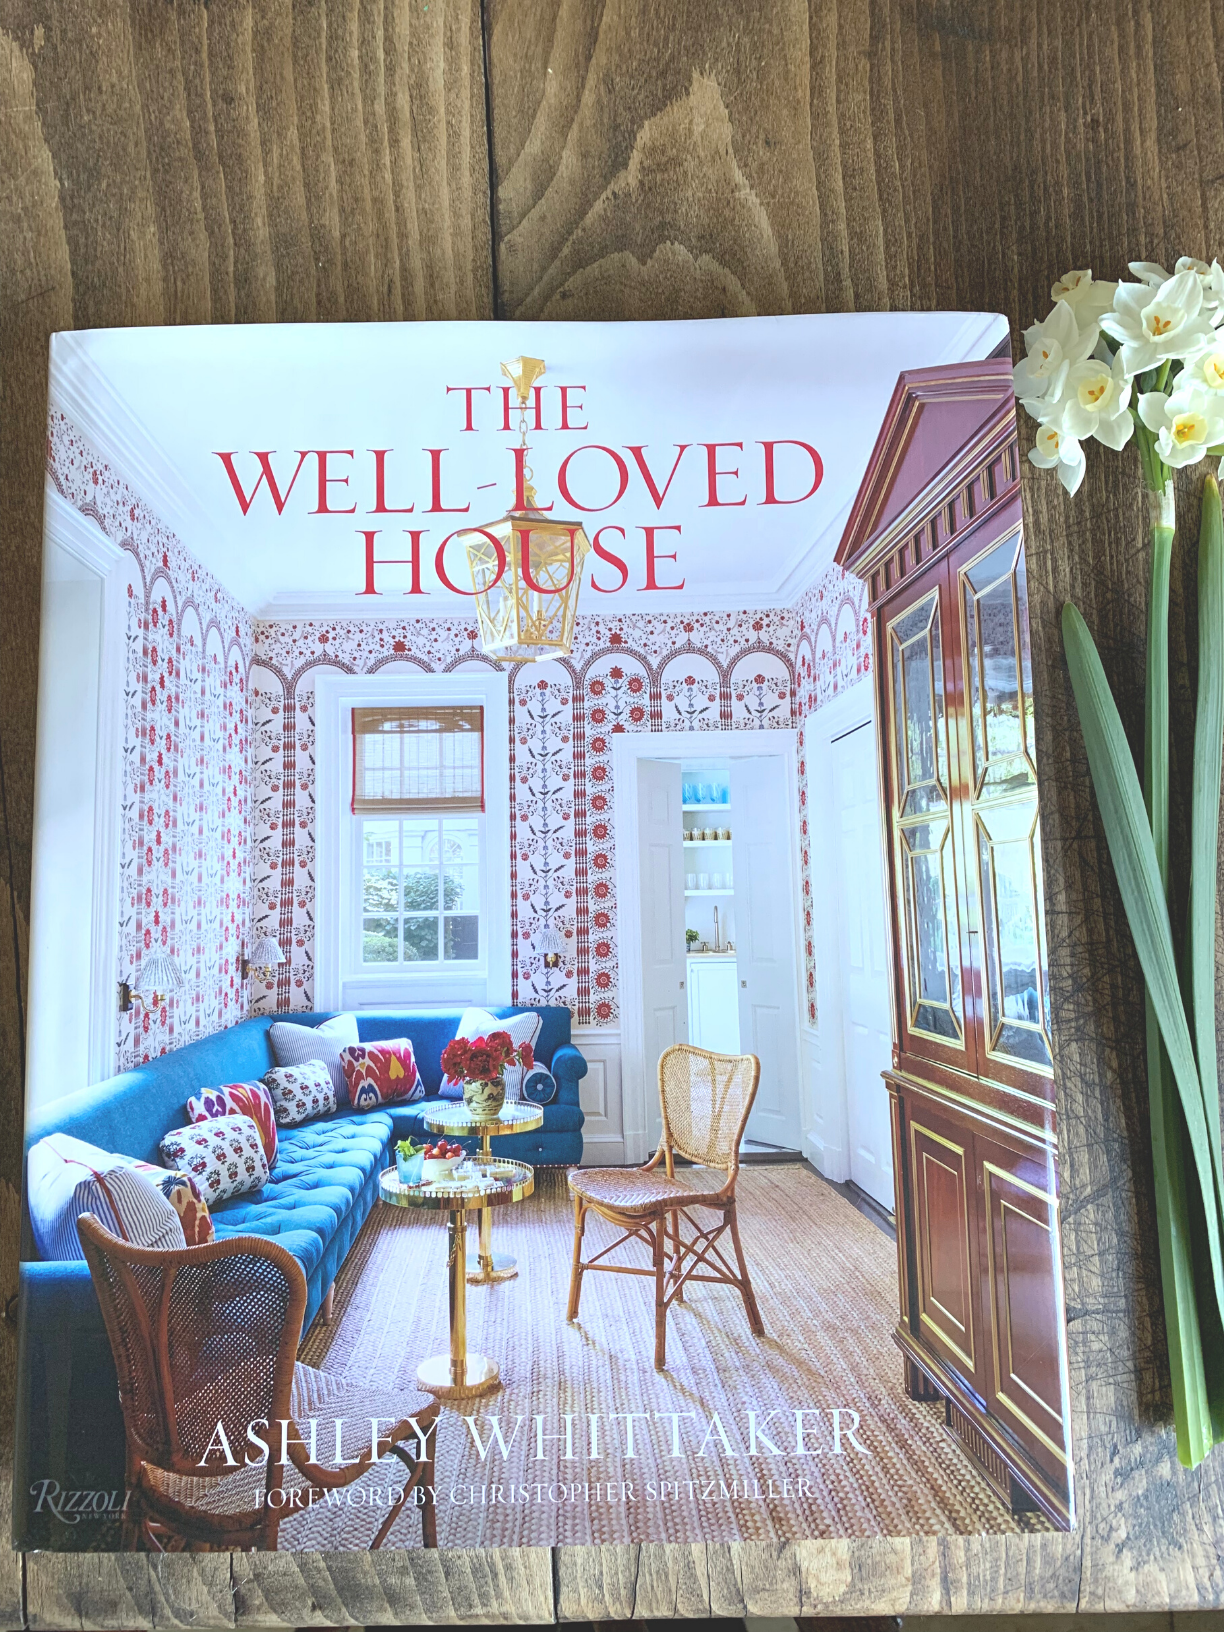 Decorator Ashley Whittaker's "The Well-Loved House" Coffee Table Book